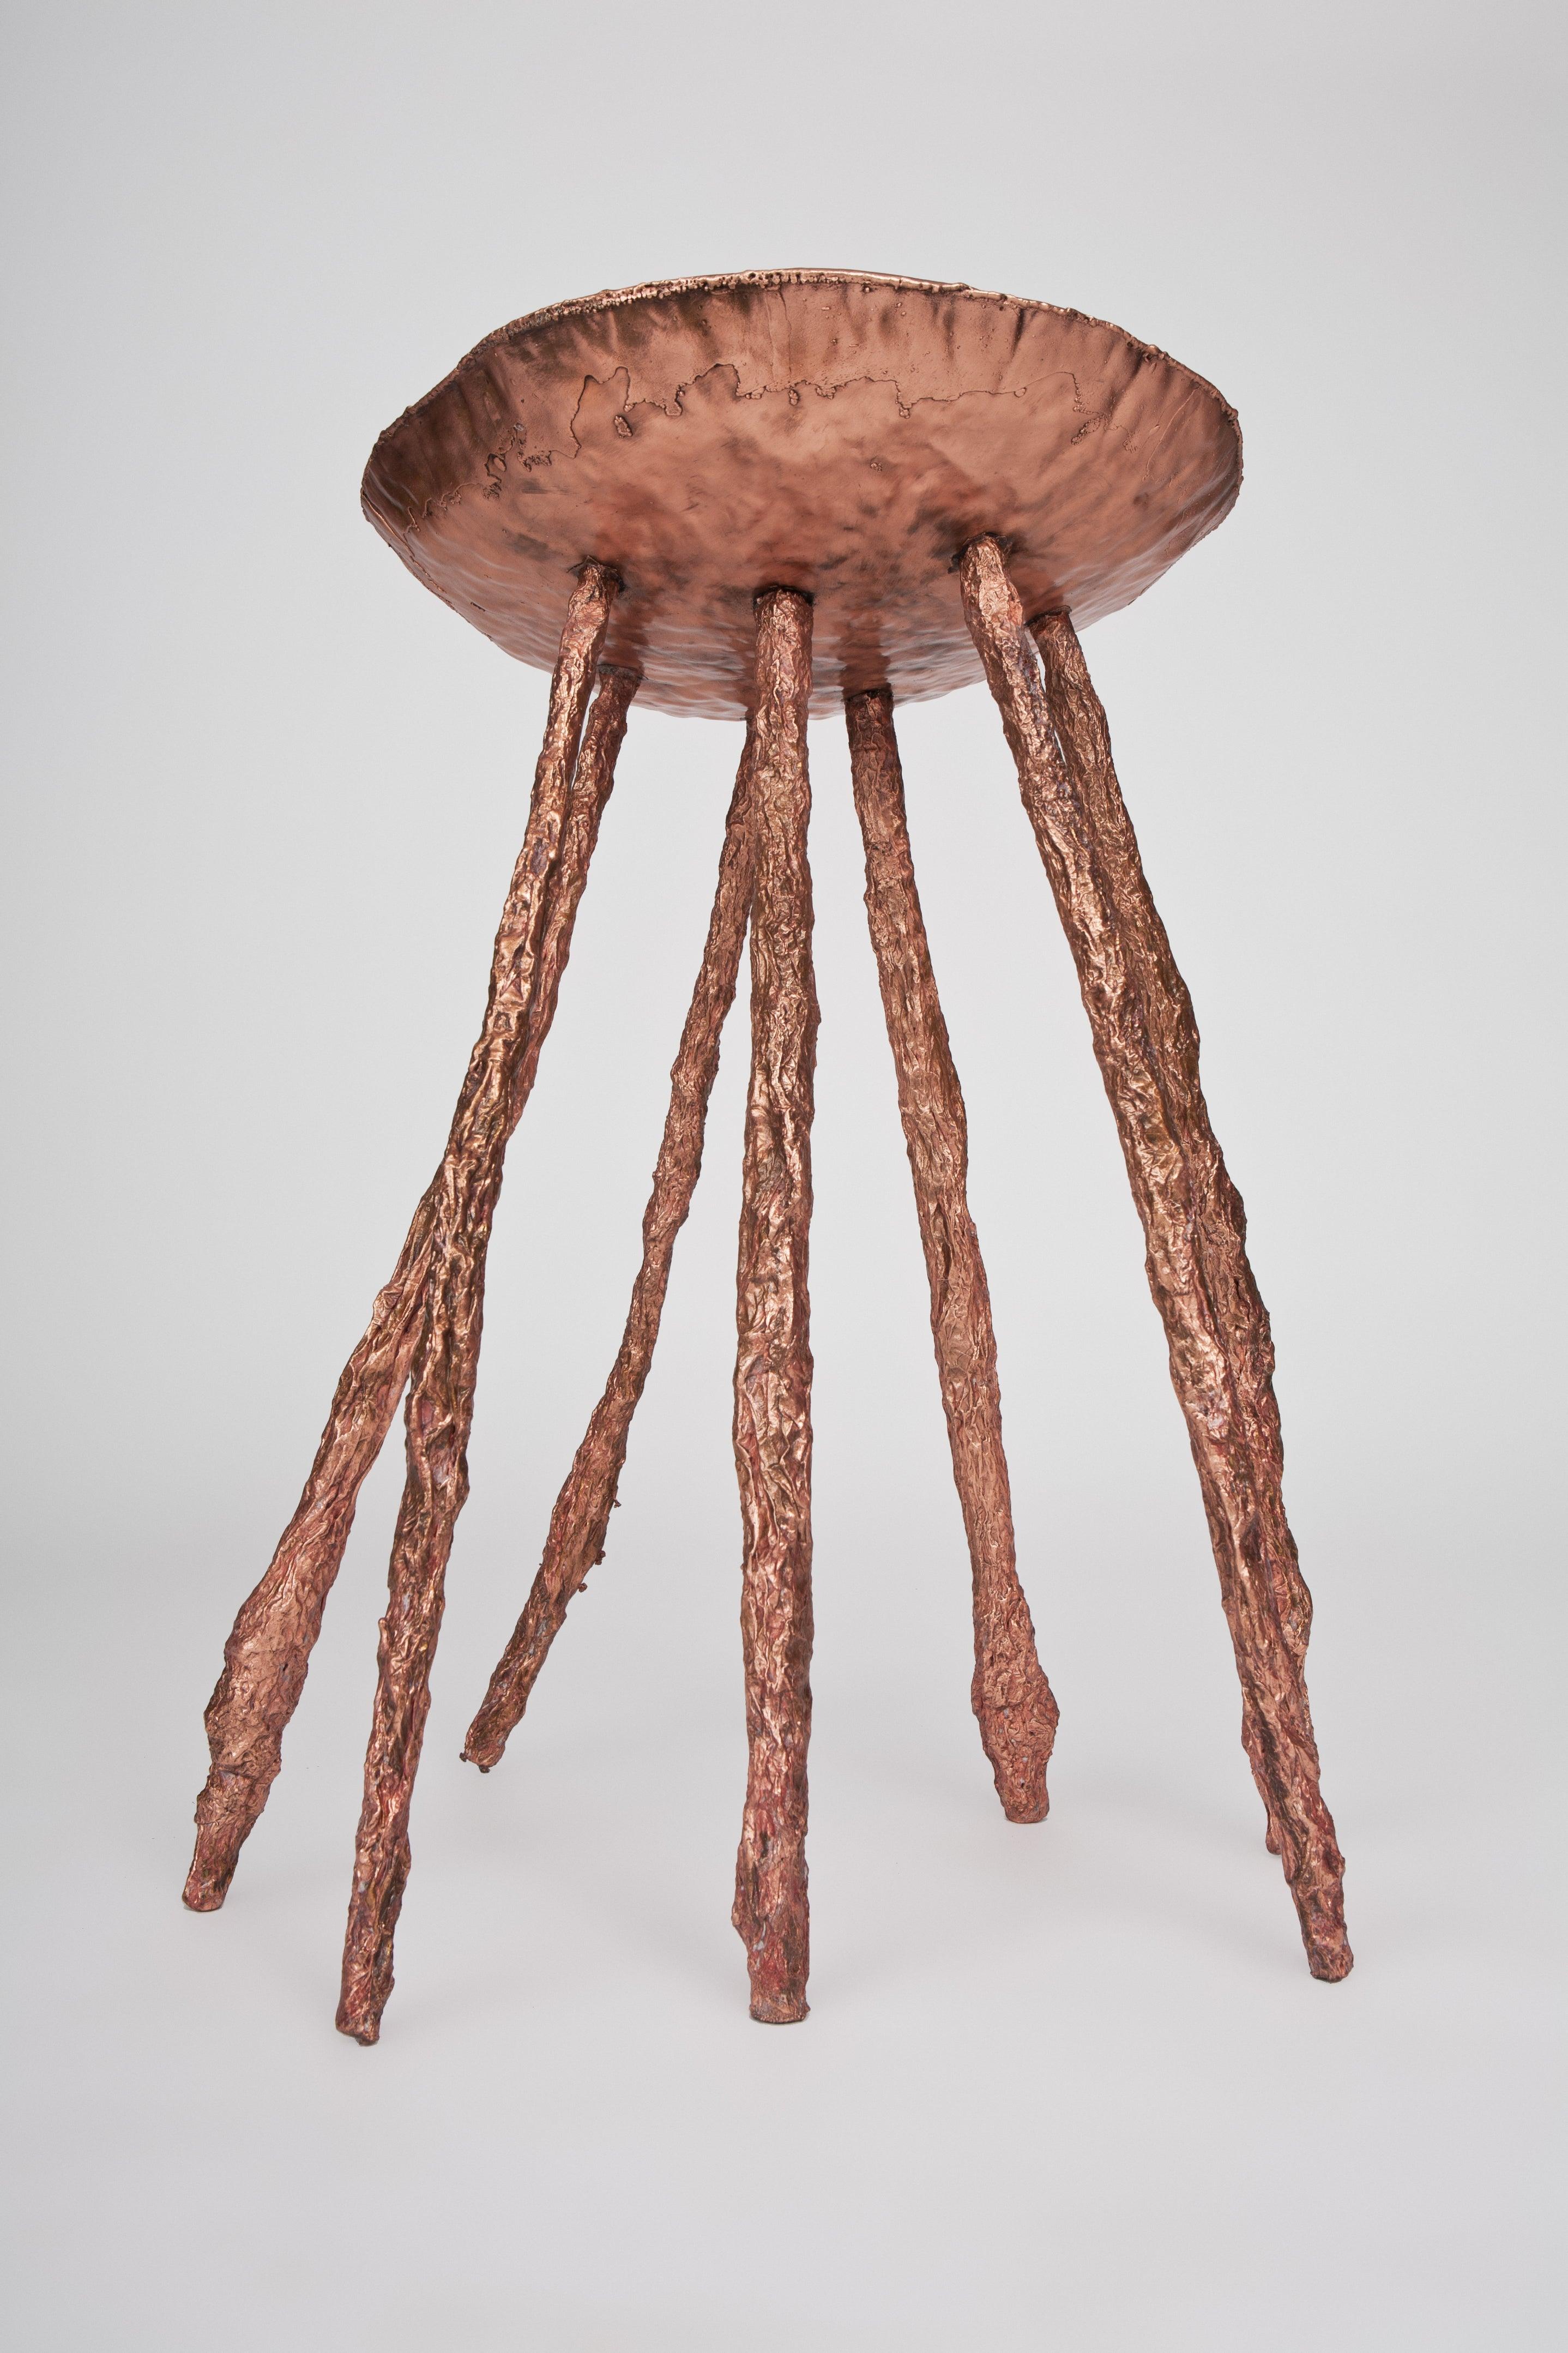 Michael Gittings Studio.
Electroformed side table
Hand beaten copper top
Electroformed copper legs.
Dimensions: 40 cm, 60 cm, 40 cm.
Limited edition of 3.

Michael Gittings
Melbourne based designer Michael Gittings aims to
Challenge